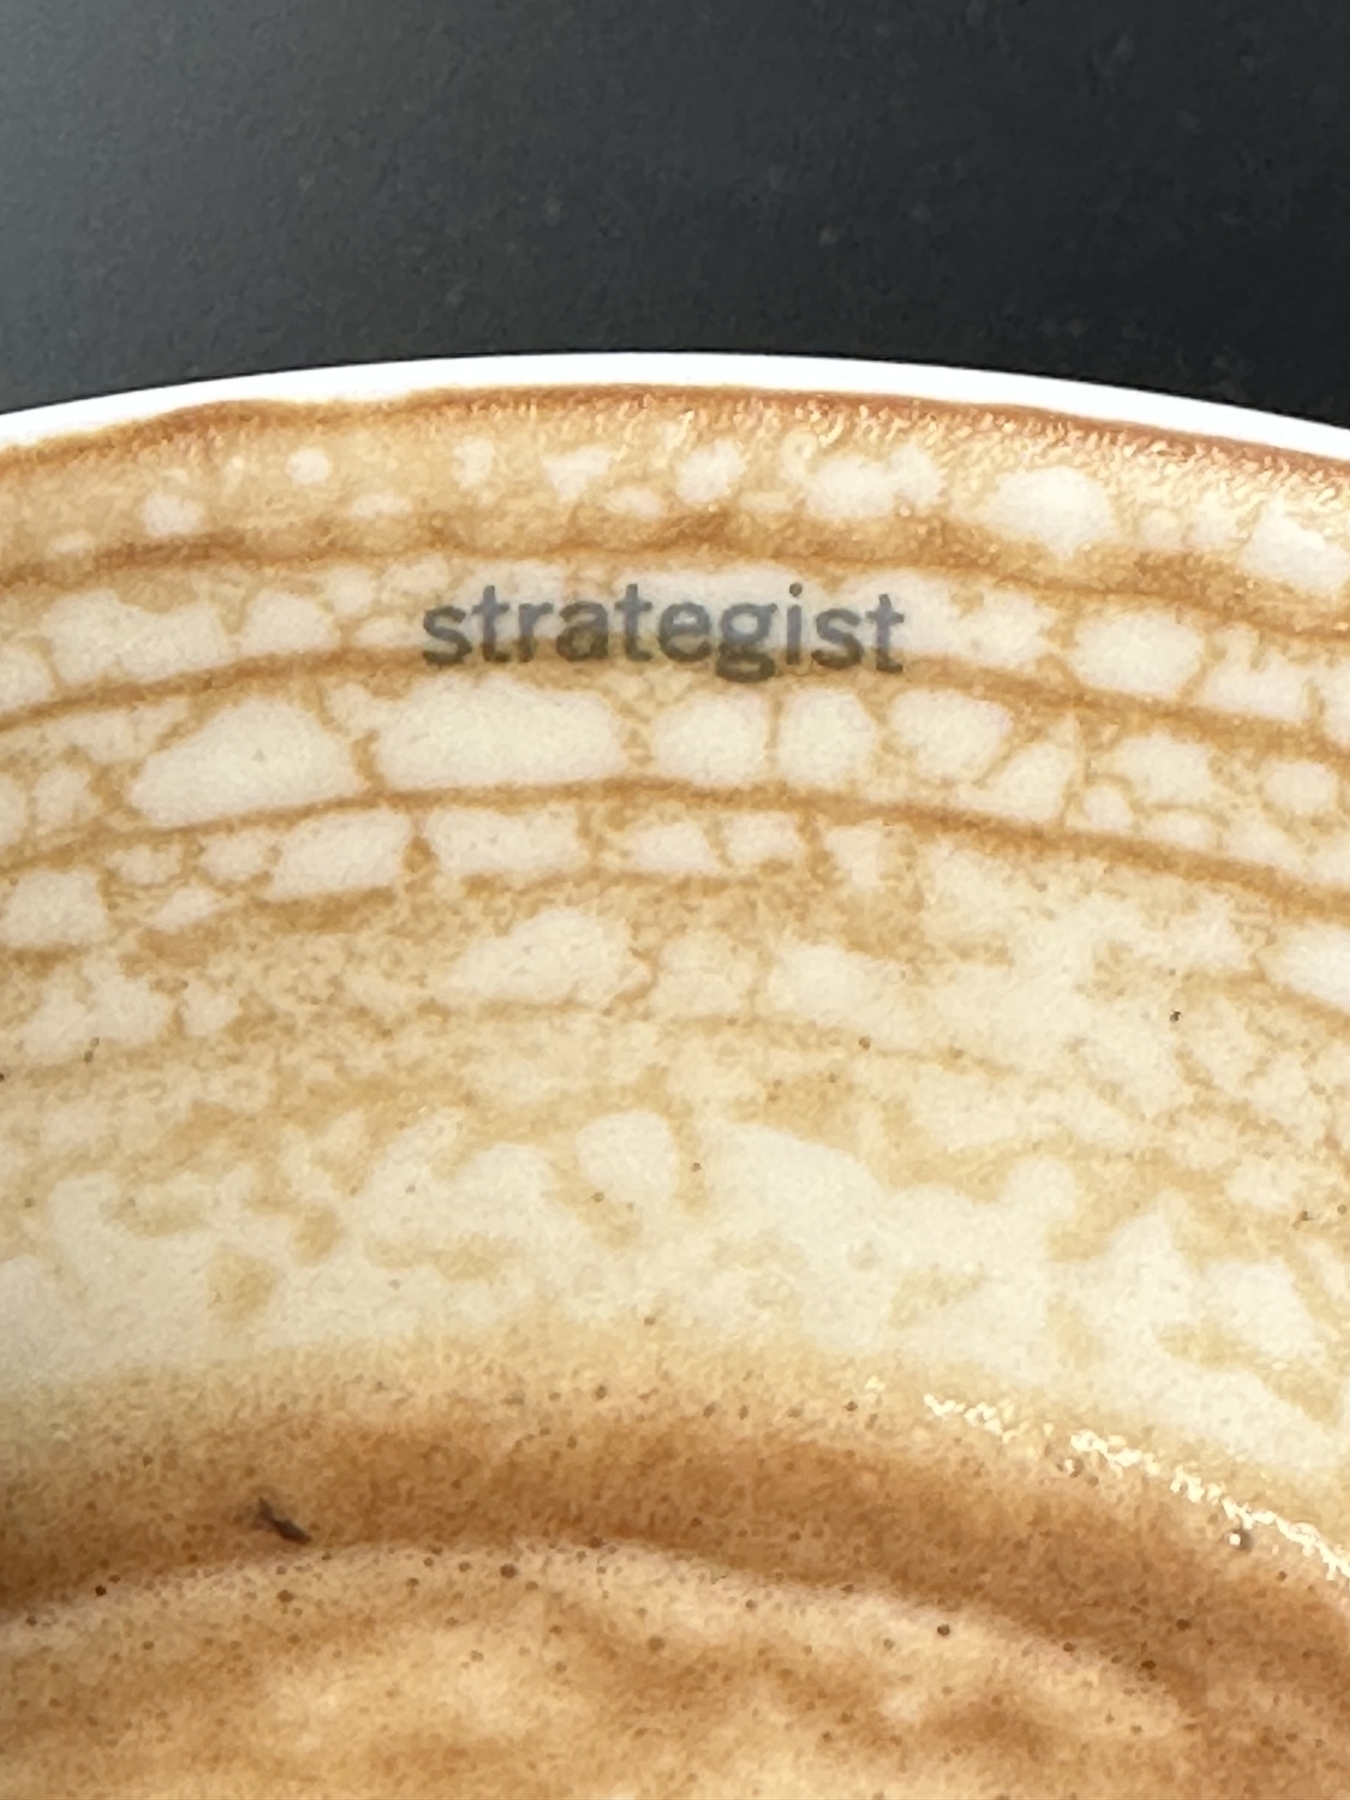 Picture of a latte with the word strategist marked on the inside of the cup.